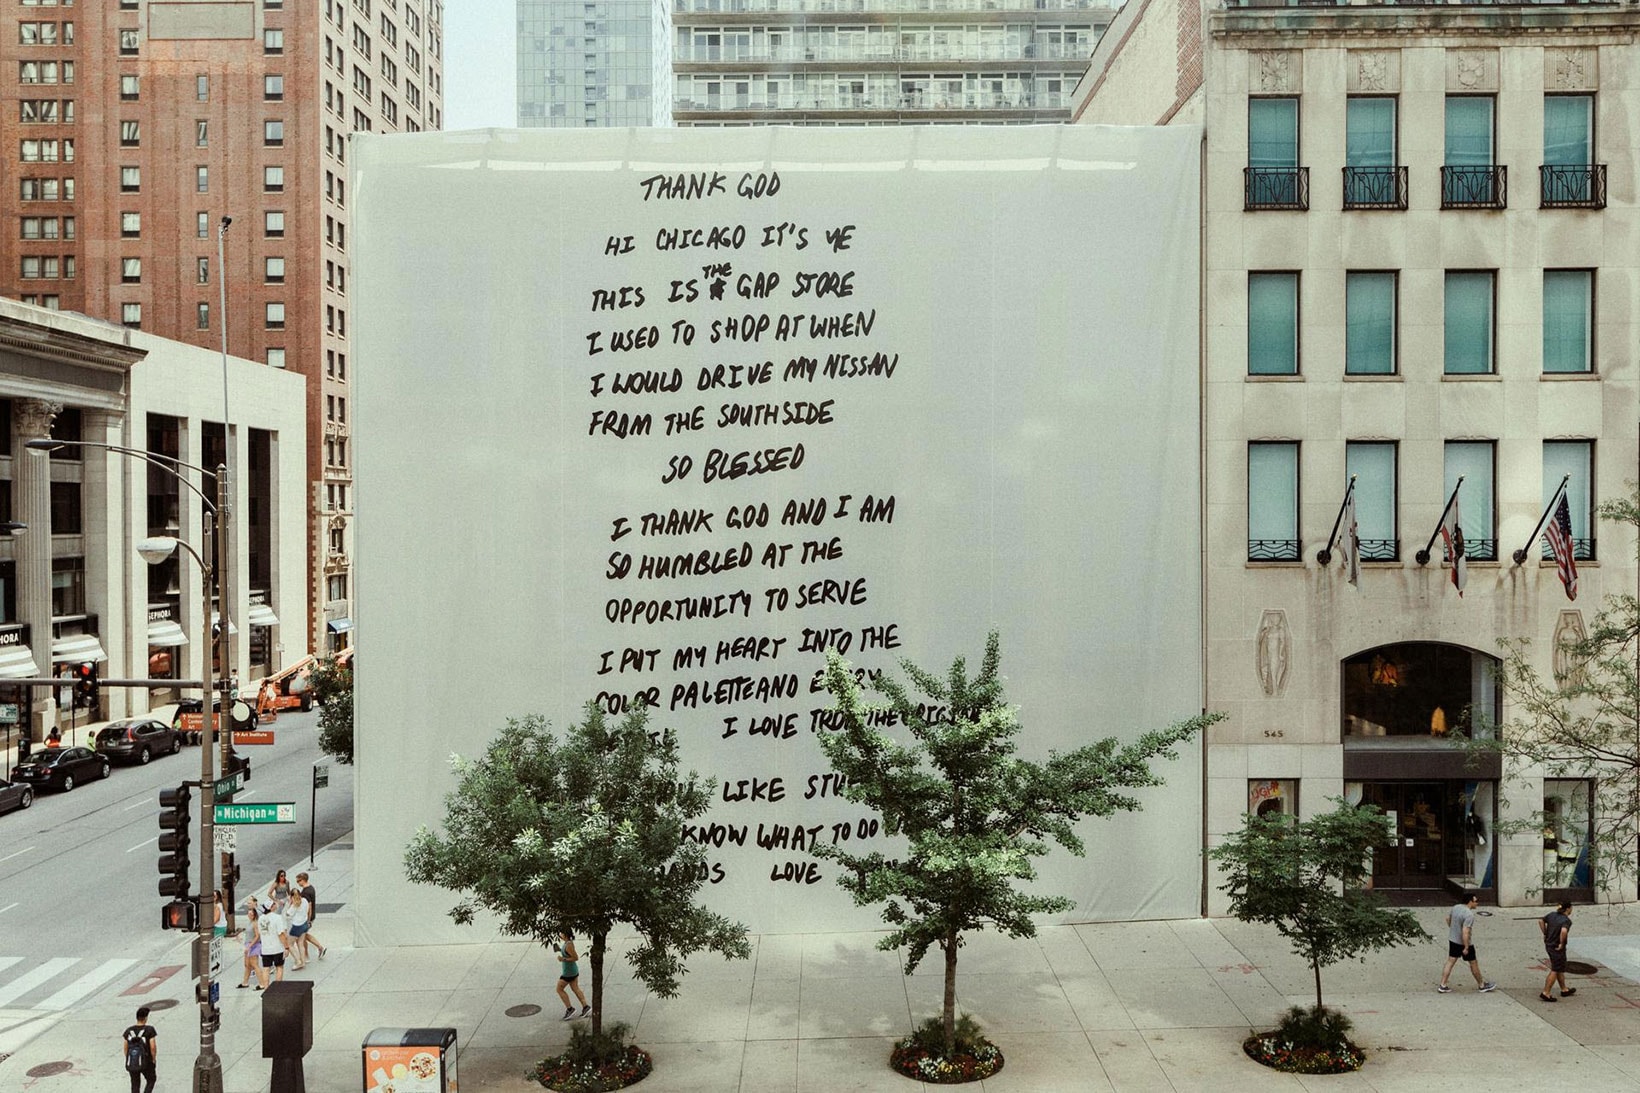 kanye west yeezy yzy gap chicago store redesign letter partnership